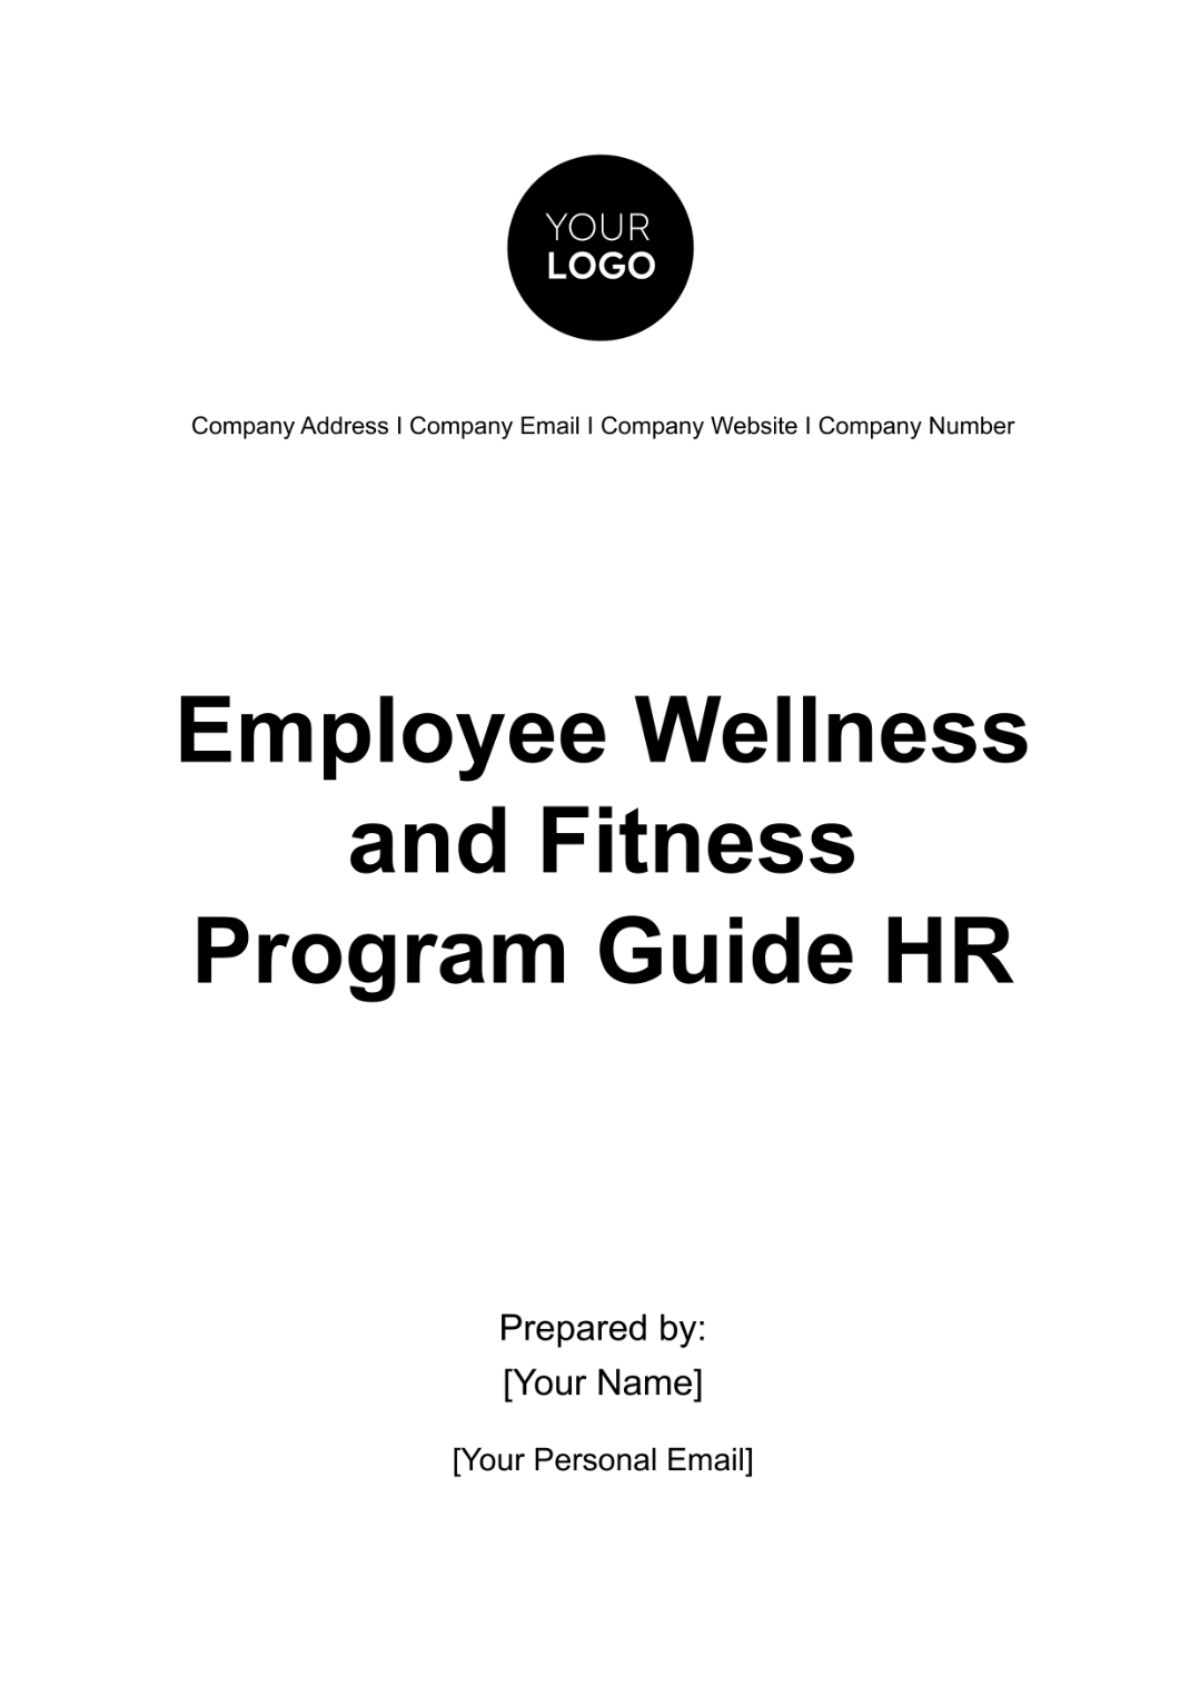 Employee Wellness and Fitness Program Guide HR Template